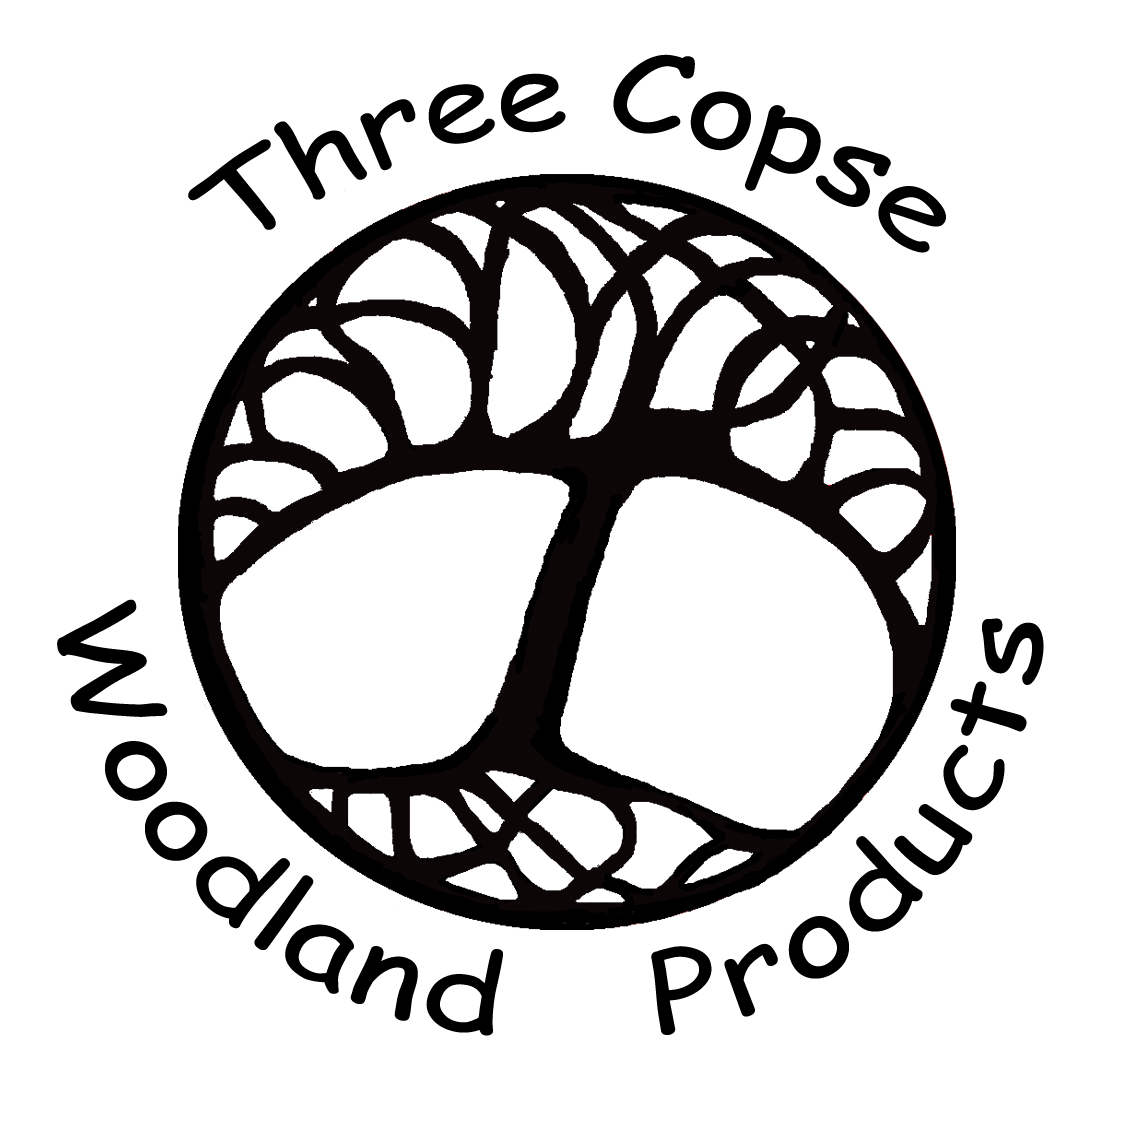 Tree of life with Three Copse Woodland Products around it